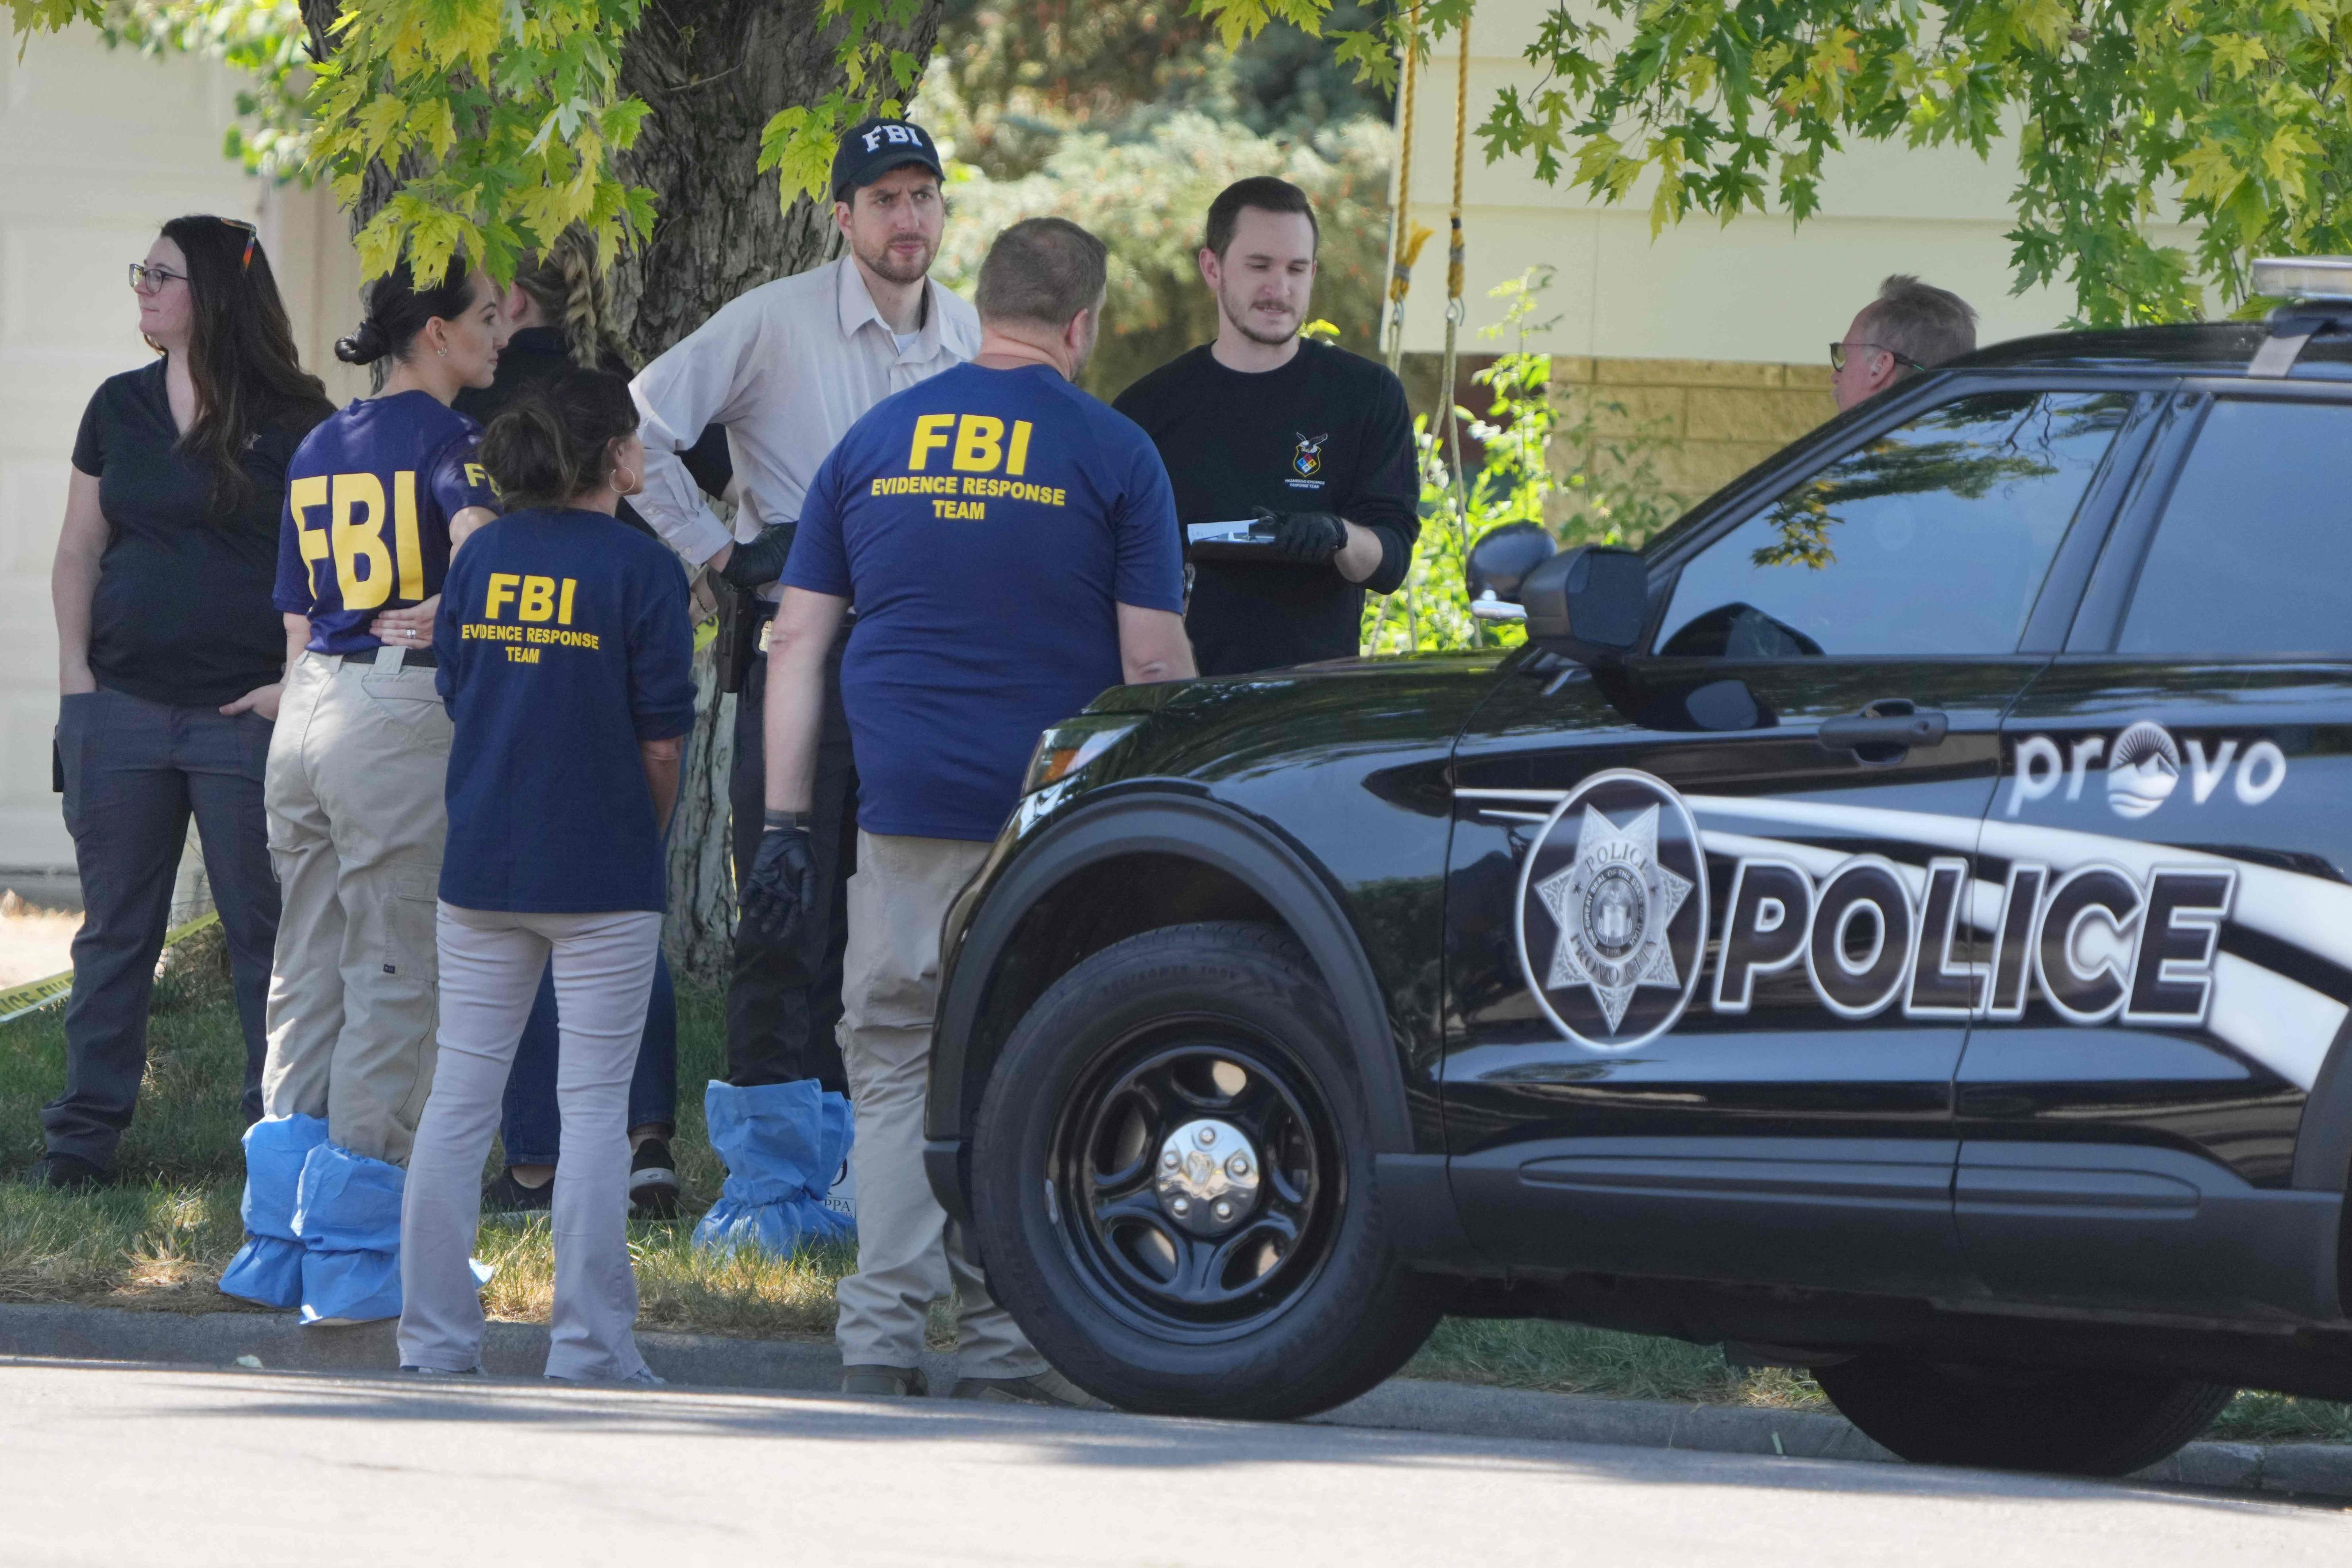 FBI officials and other law enforcement officers stand outside the home of Craig Robertson. who was shot and killed in a raid on his home in Provo, Utah, on Wednesday. Photo: AFP